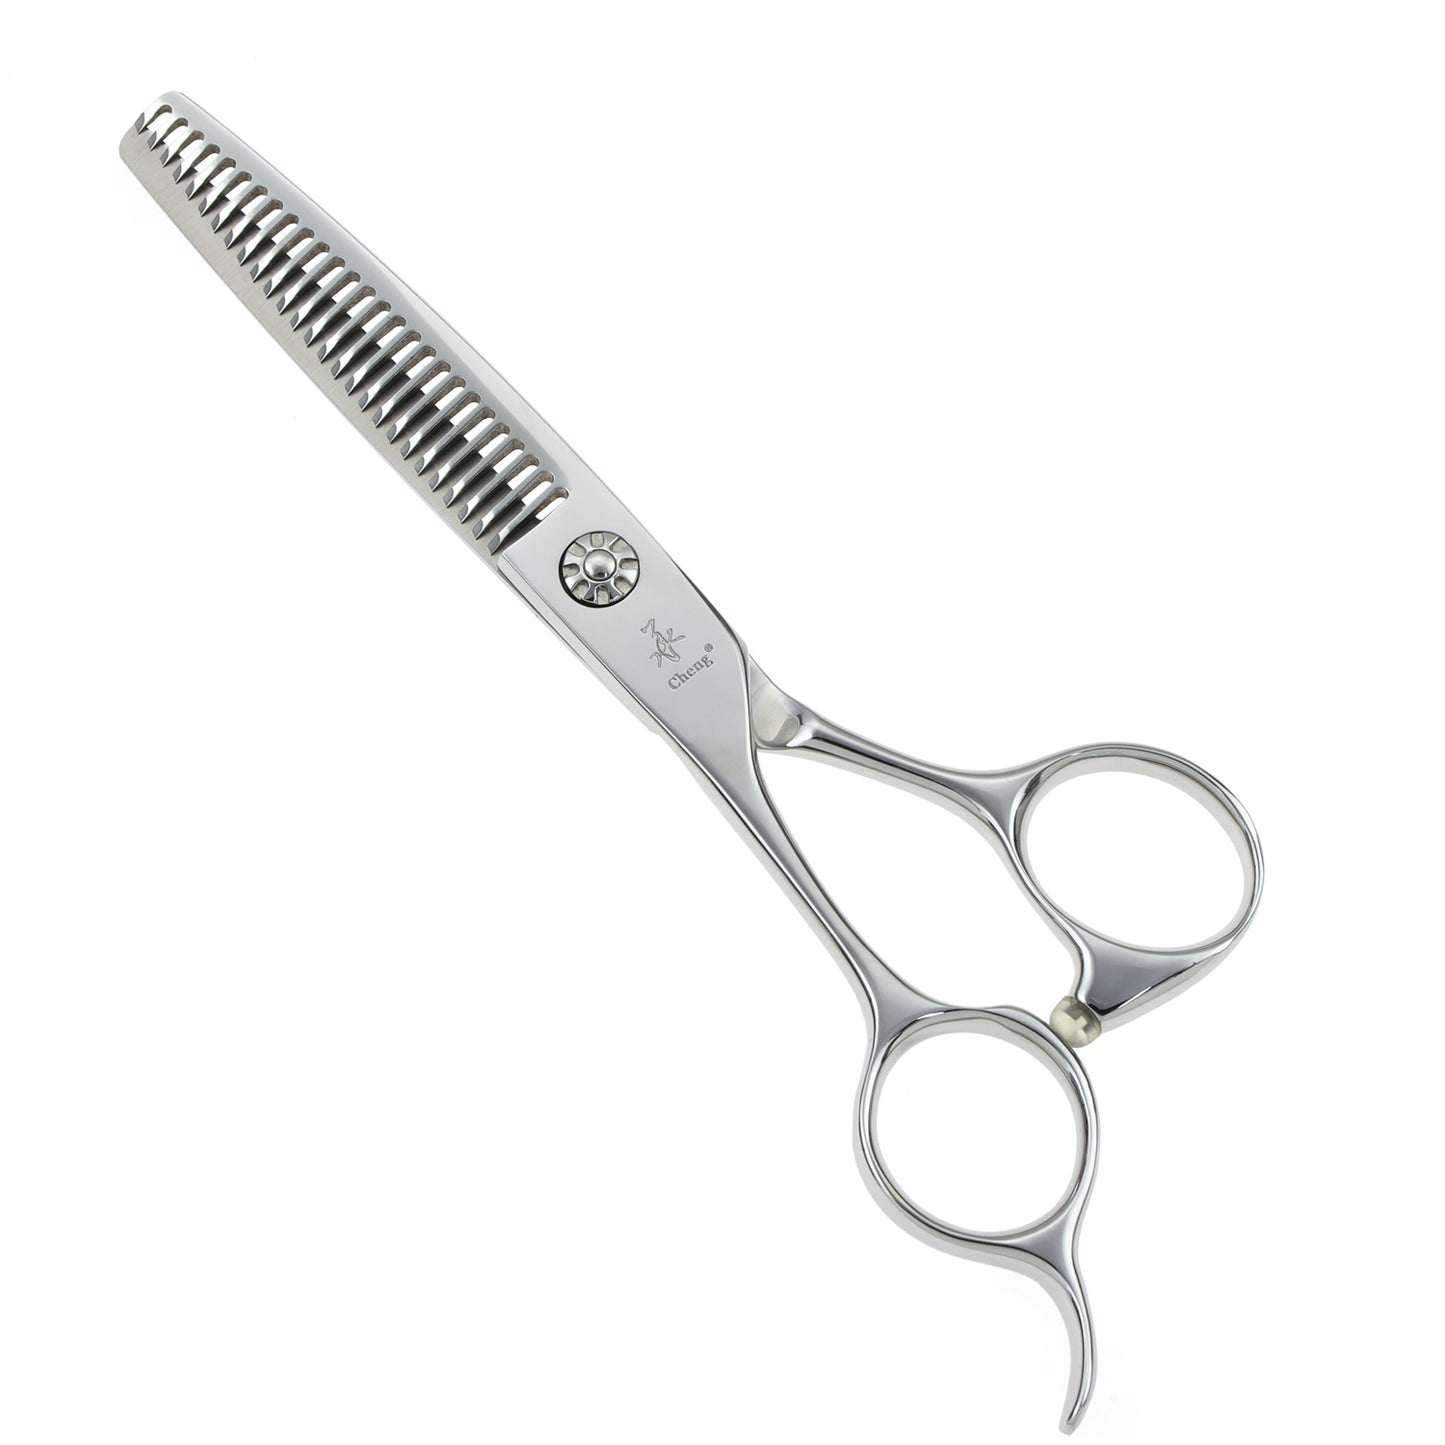 BF-627TZA  Hair Thinning Cutting Scissors 6.0 Inch 27T Left Hand About=10%~15%